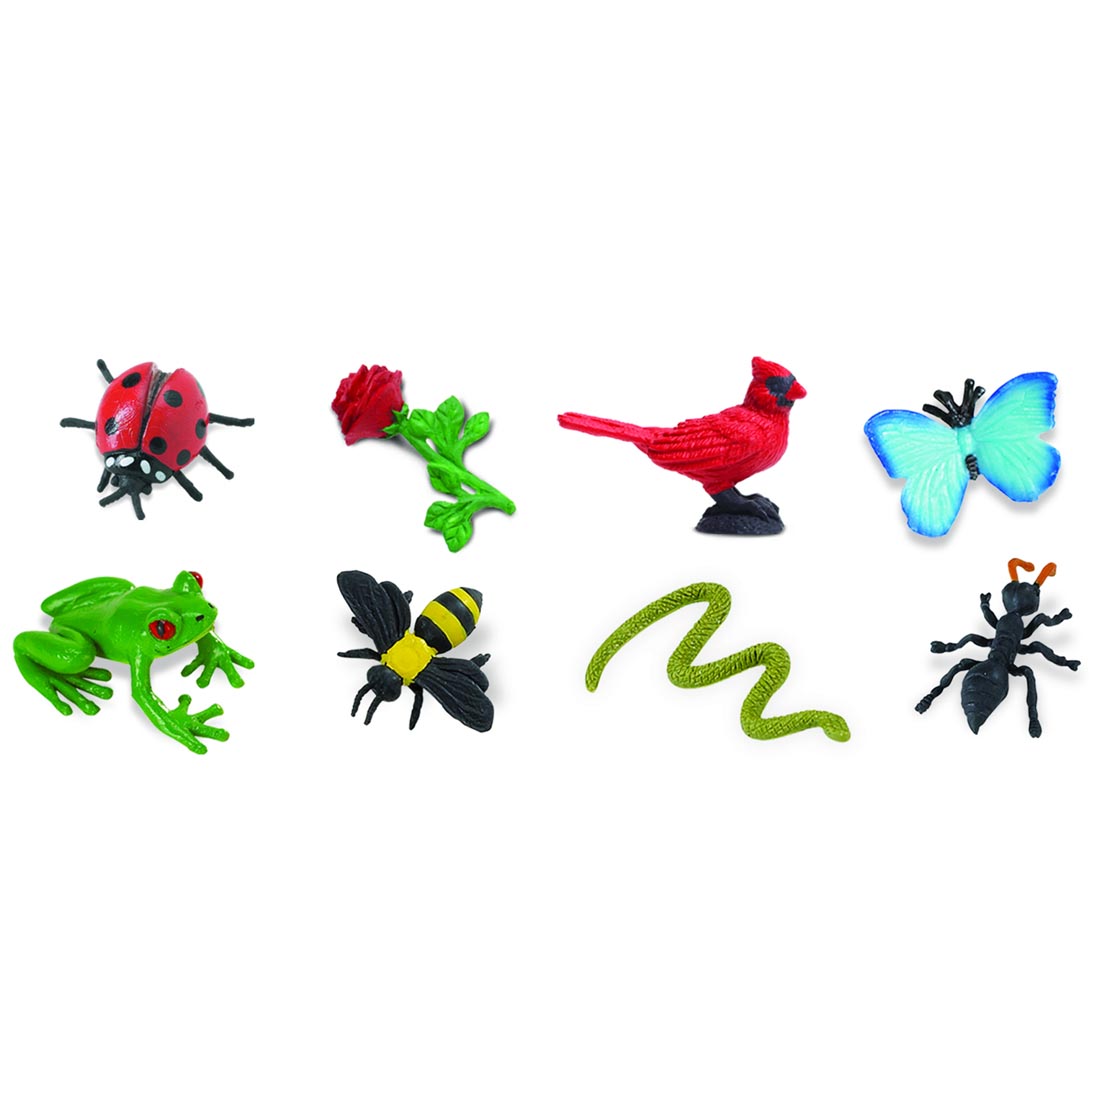 Garden Mini Figurines include ladybug, rose, cardinal, butterfly, frog, bee, snake and ant